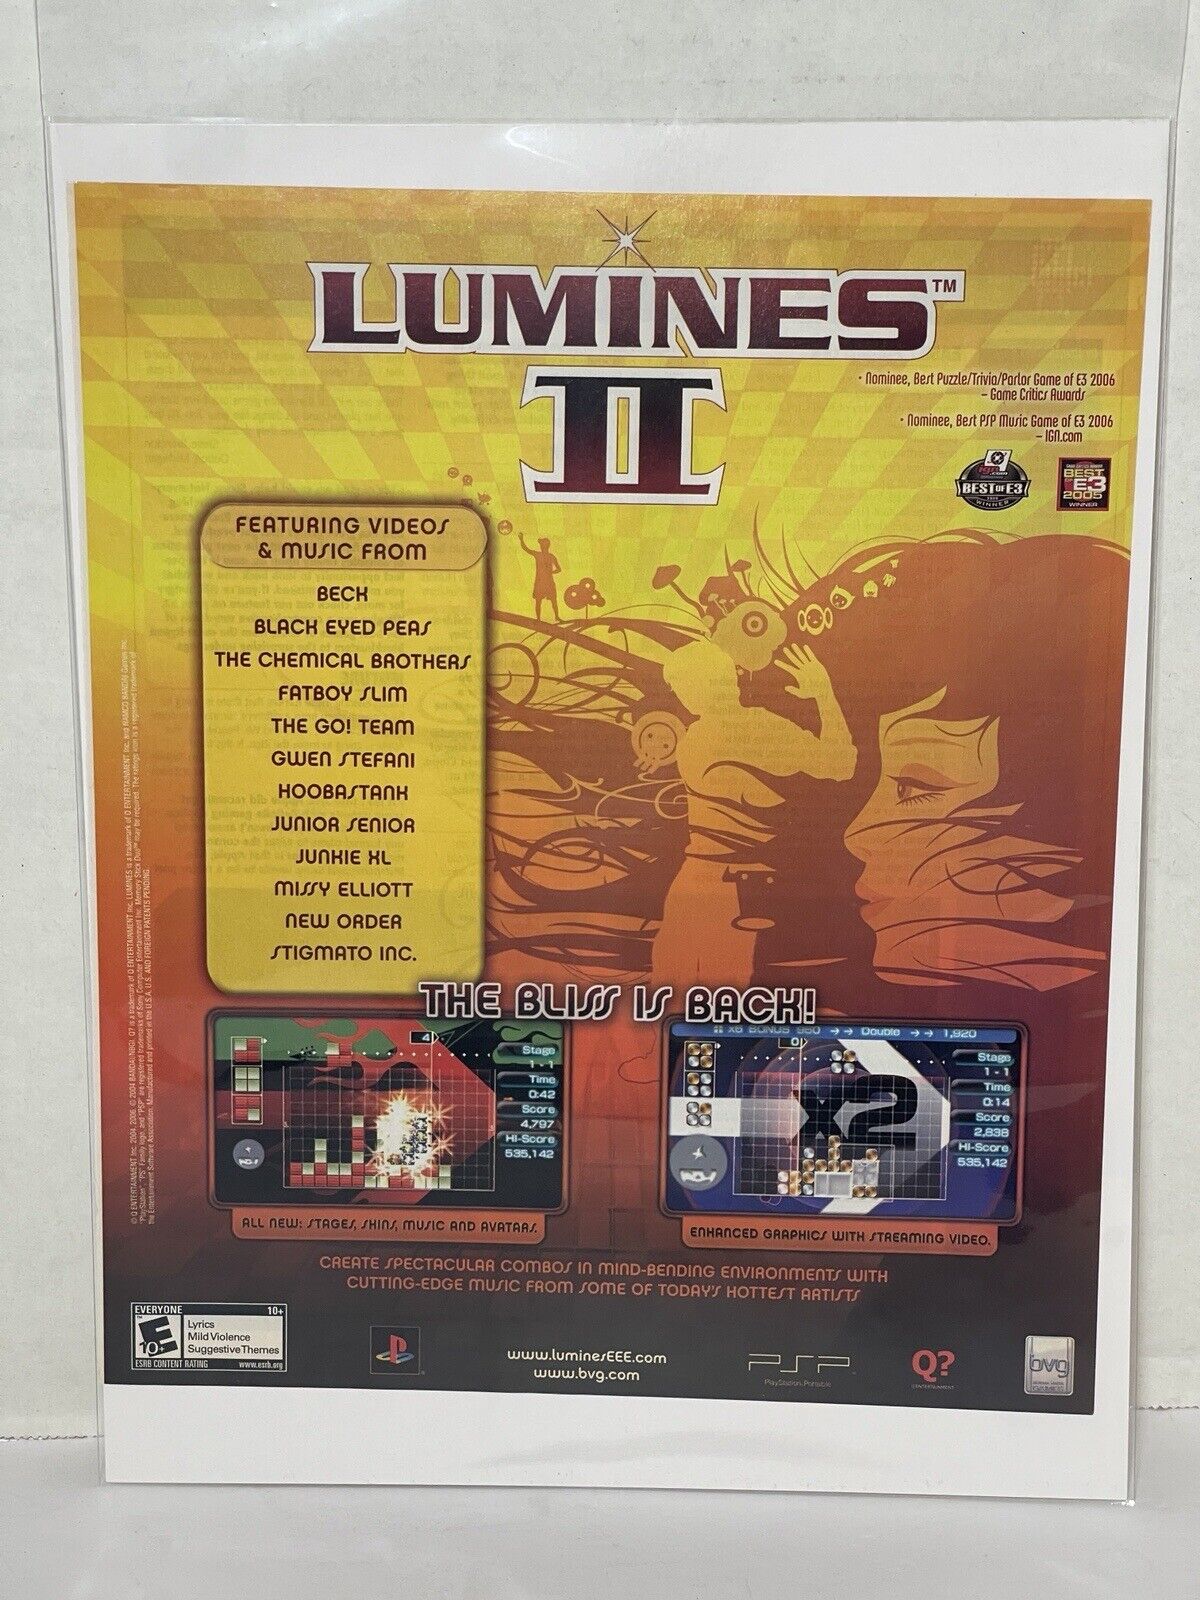 Lumines II Print Ad Game Poster Art PROMO Official PSP PlayStation Portable 2